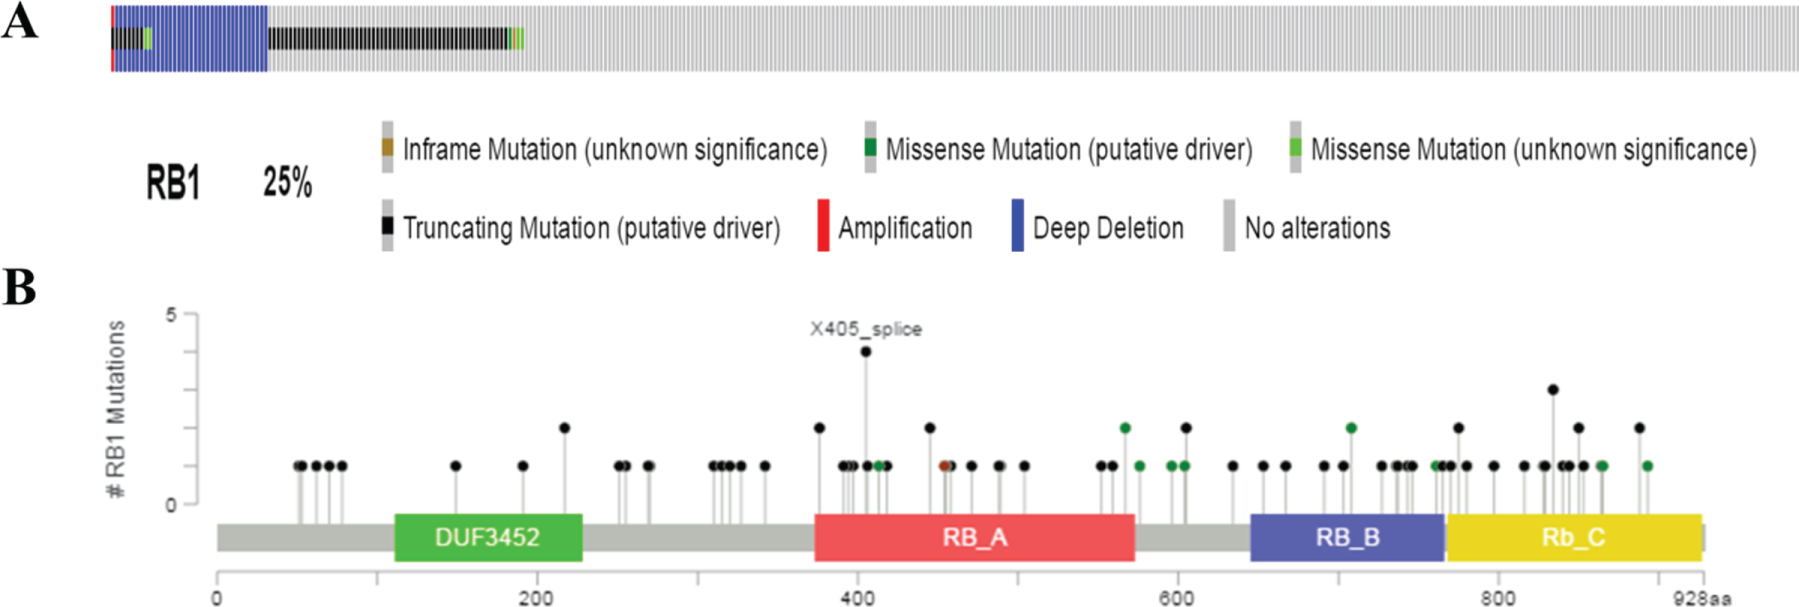 Mutation frequency and types of RB1 in bladder cancer from the cancer Genome Atlas (TCGA) database. A. Mutation frequency of RB1 in bladder cancer. B. Mutation types of RB1 in bladder cancer.